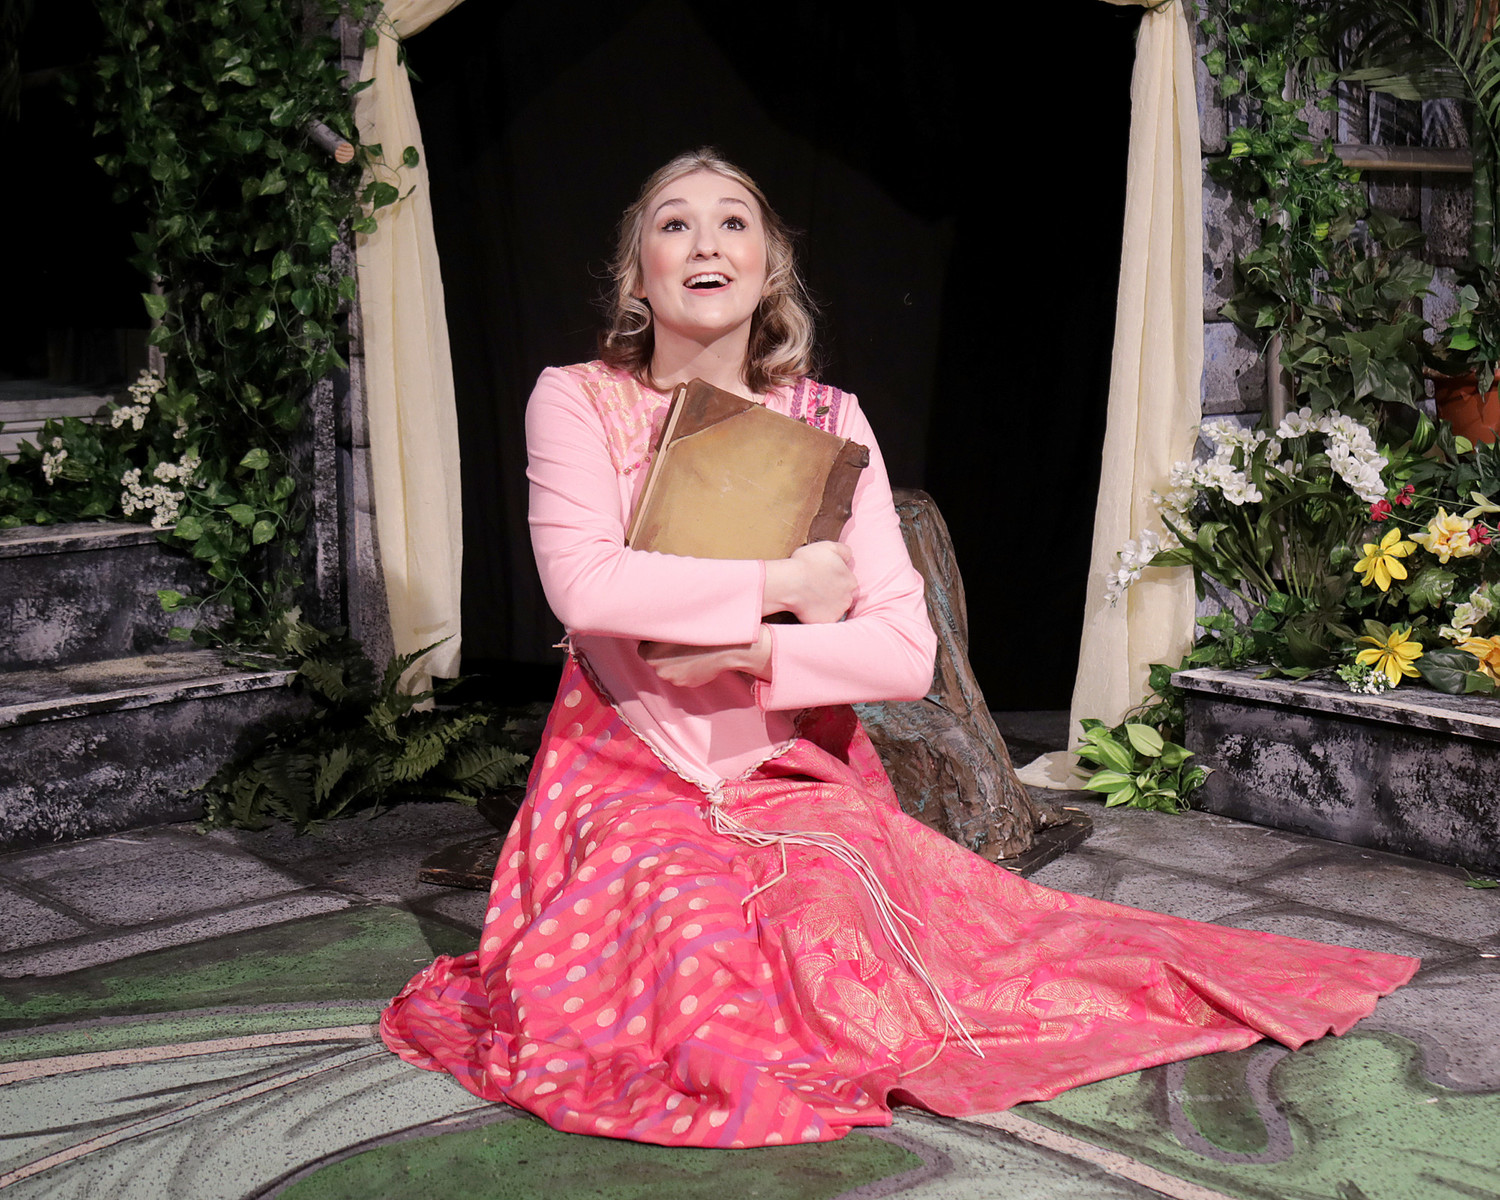 BWW Review: ELLA ENCHANTED at Kate Goldman Children's Theatre-Des Moines Playhouse: An Enchanting Evening for Children of All Ages 